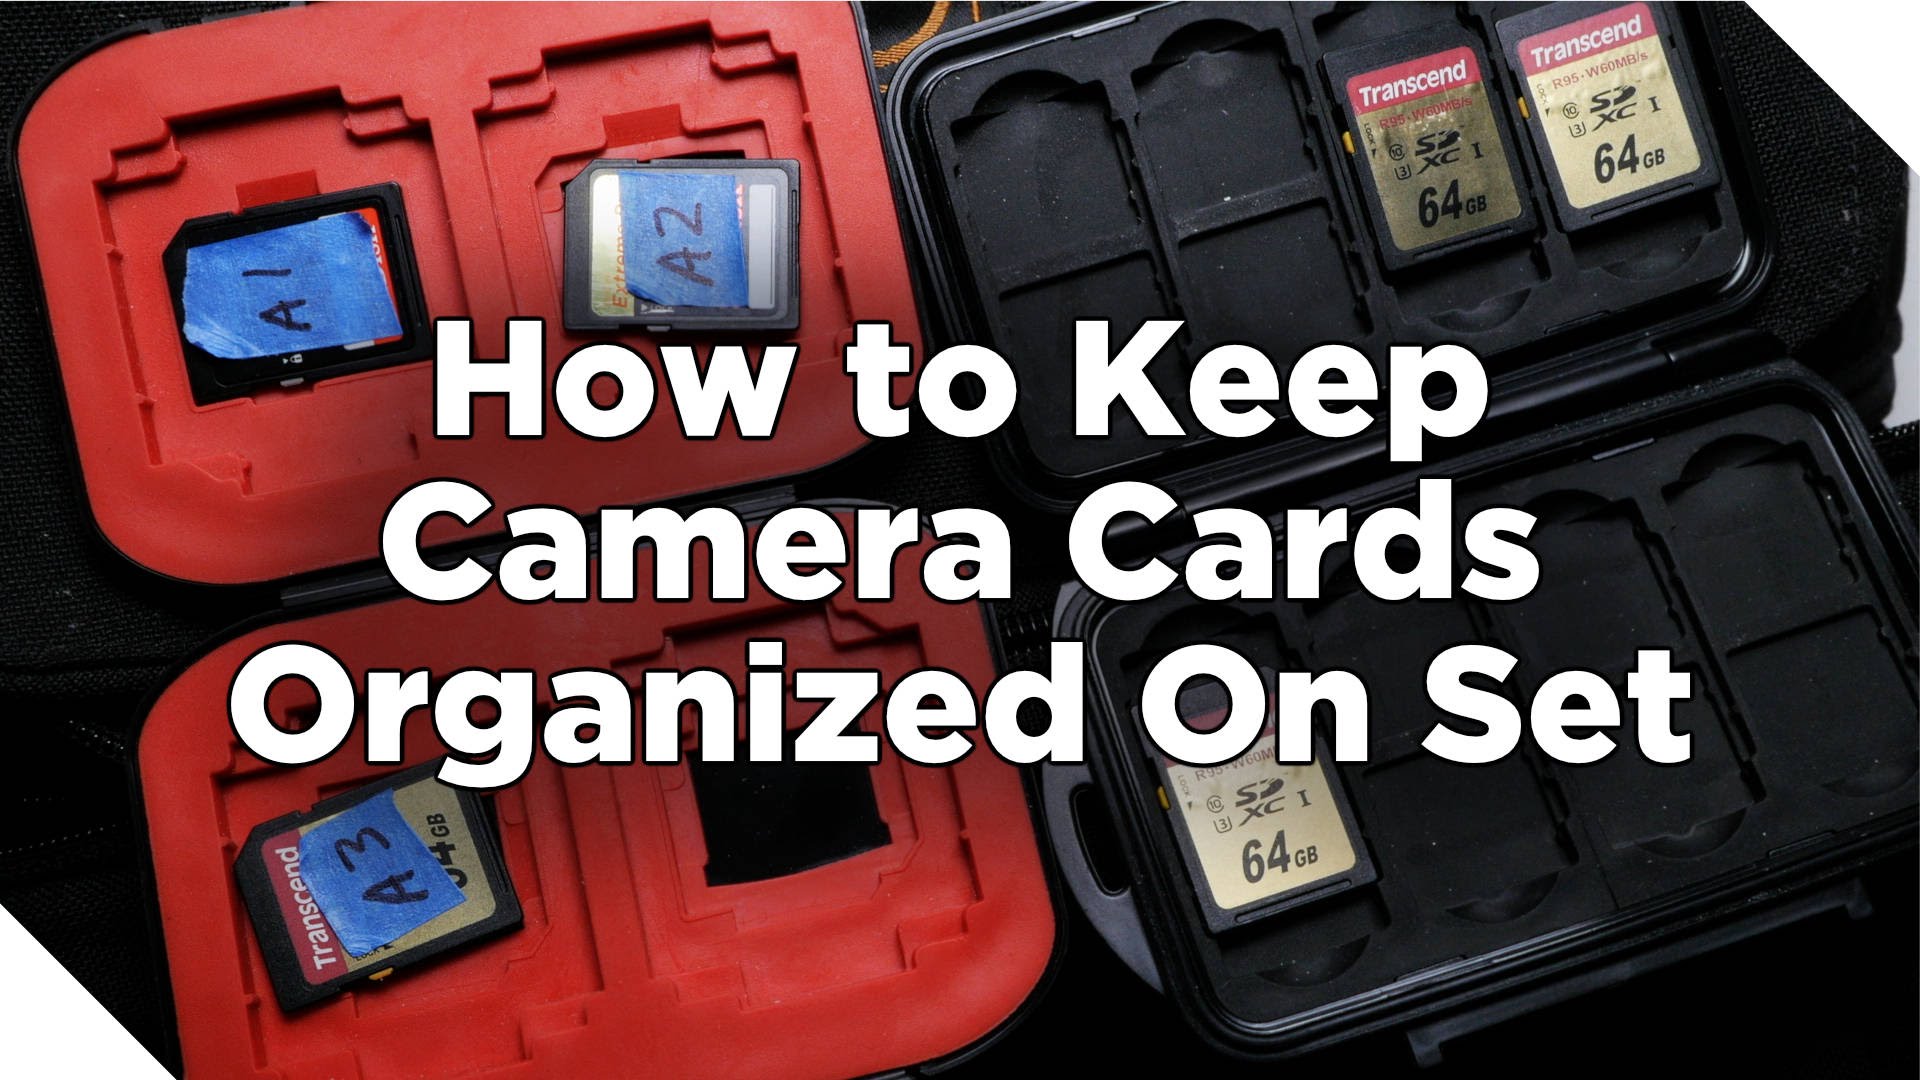 How to Keep Camera Cards Organized On Set (Corporate Video Guide)